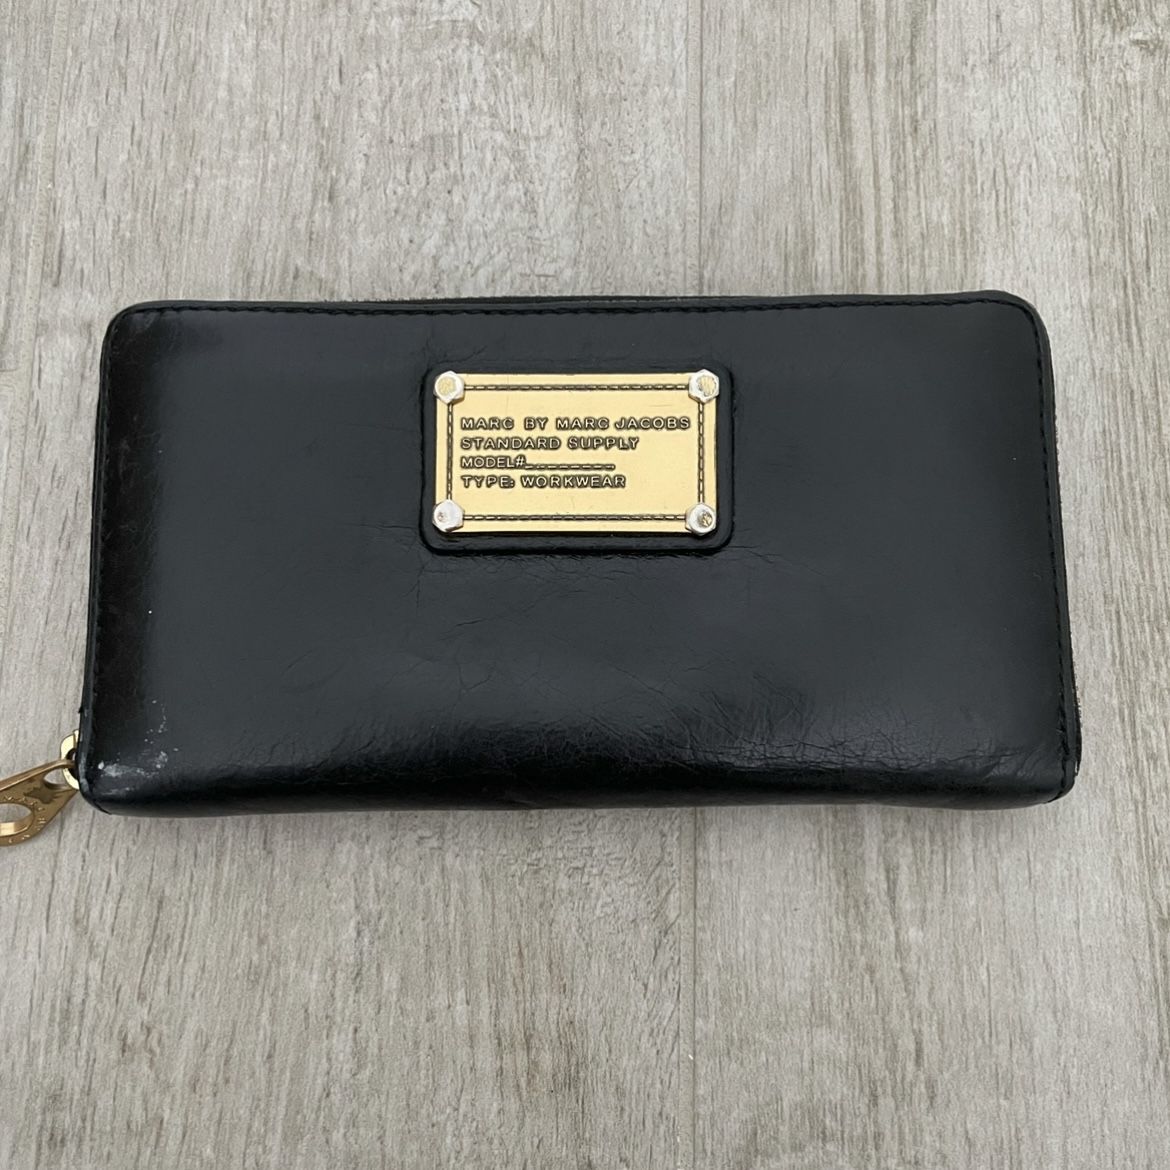 Marc by Marc Jacobs Black Wallet